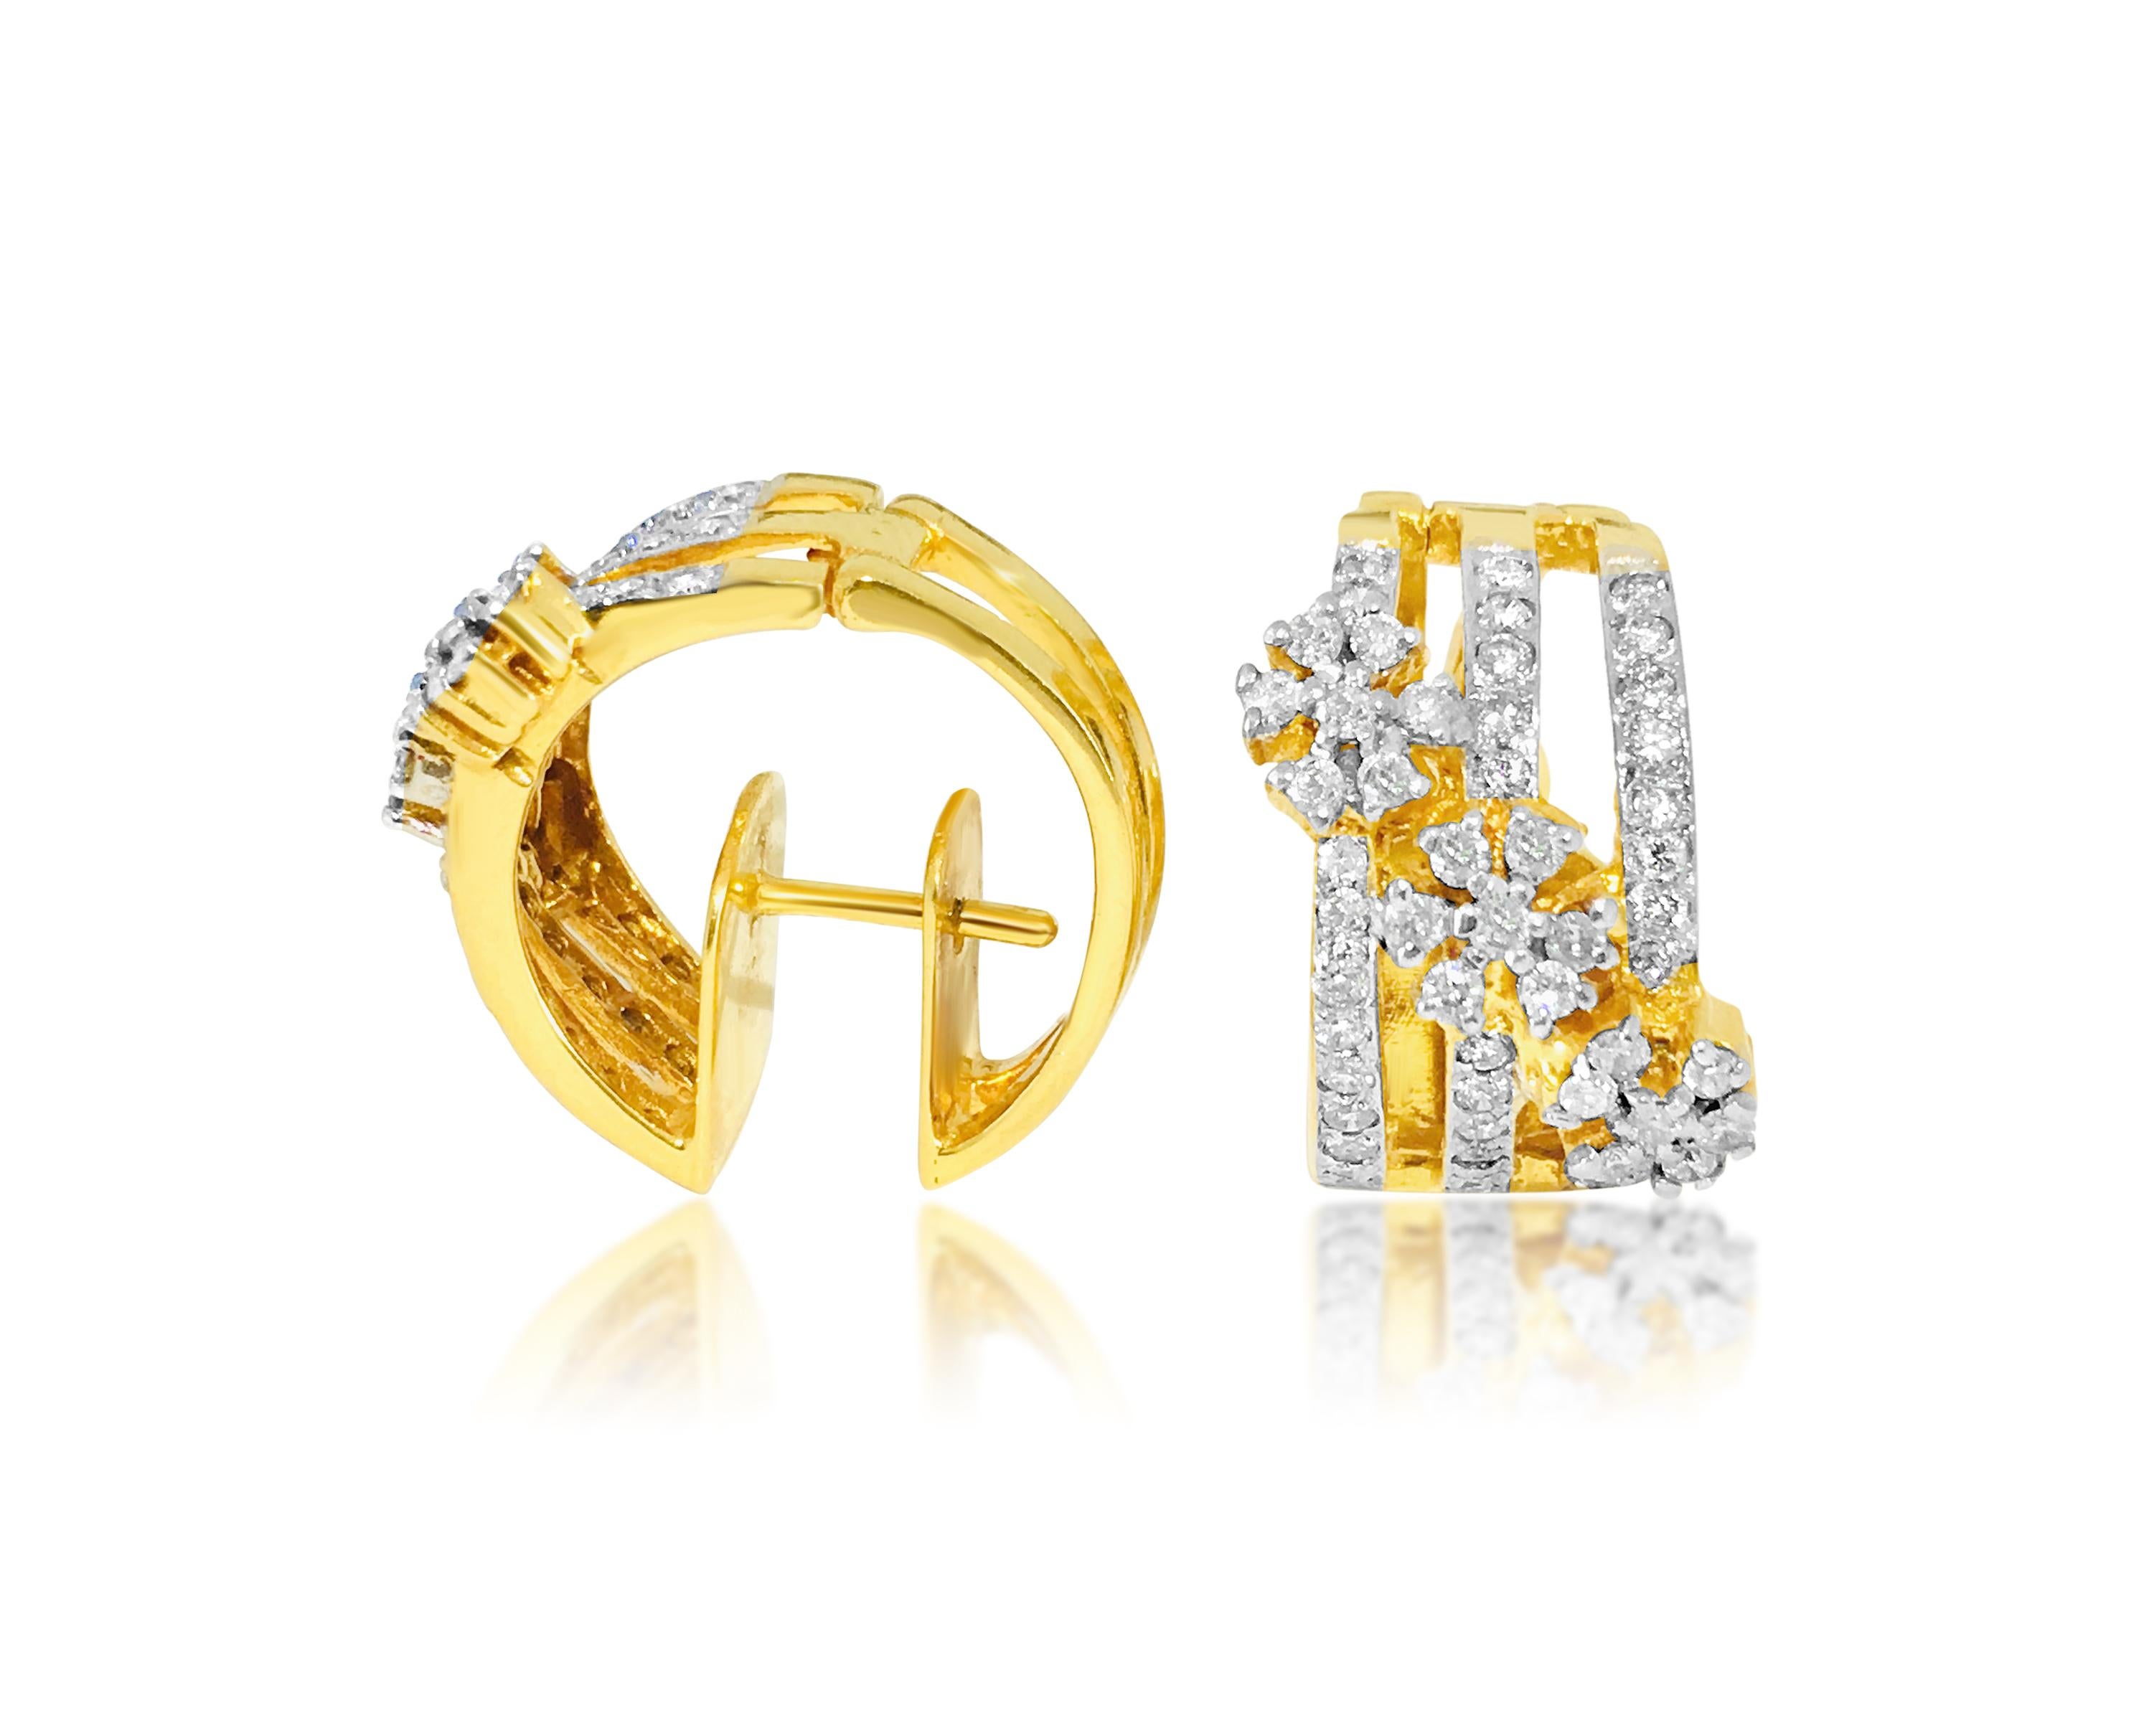 Embrace the elegance of our 14K Yellow Gold Diamond Earrings, featuring exquisite round brilliant cut diamonds totaling 1.35 carats. Set in stunning yellow gold, these earrings exude sophistication and style. Each diamond boasts SI-I1 clarity and G